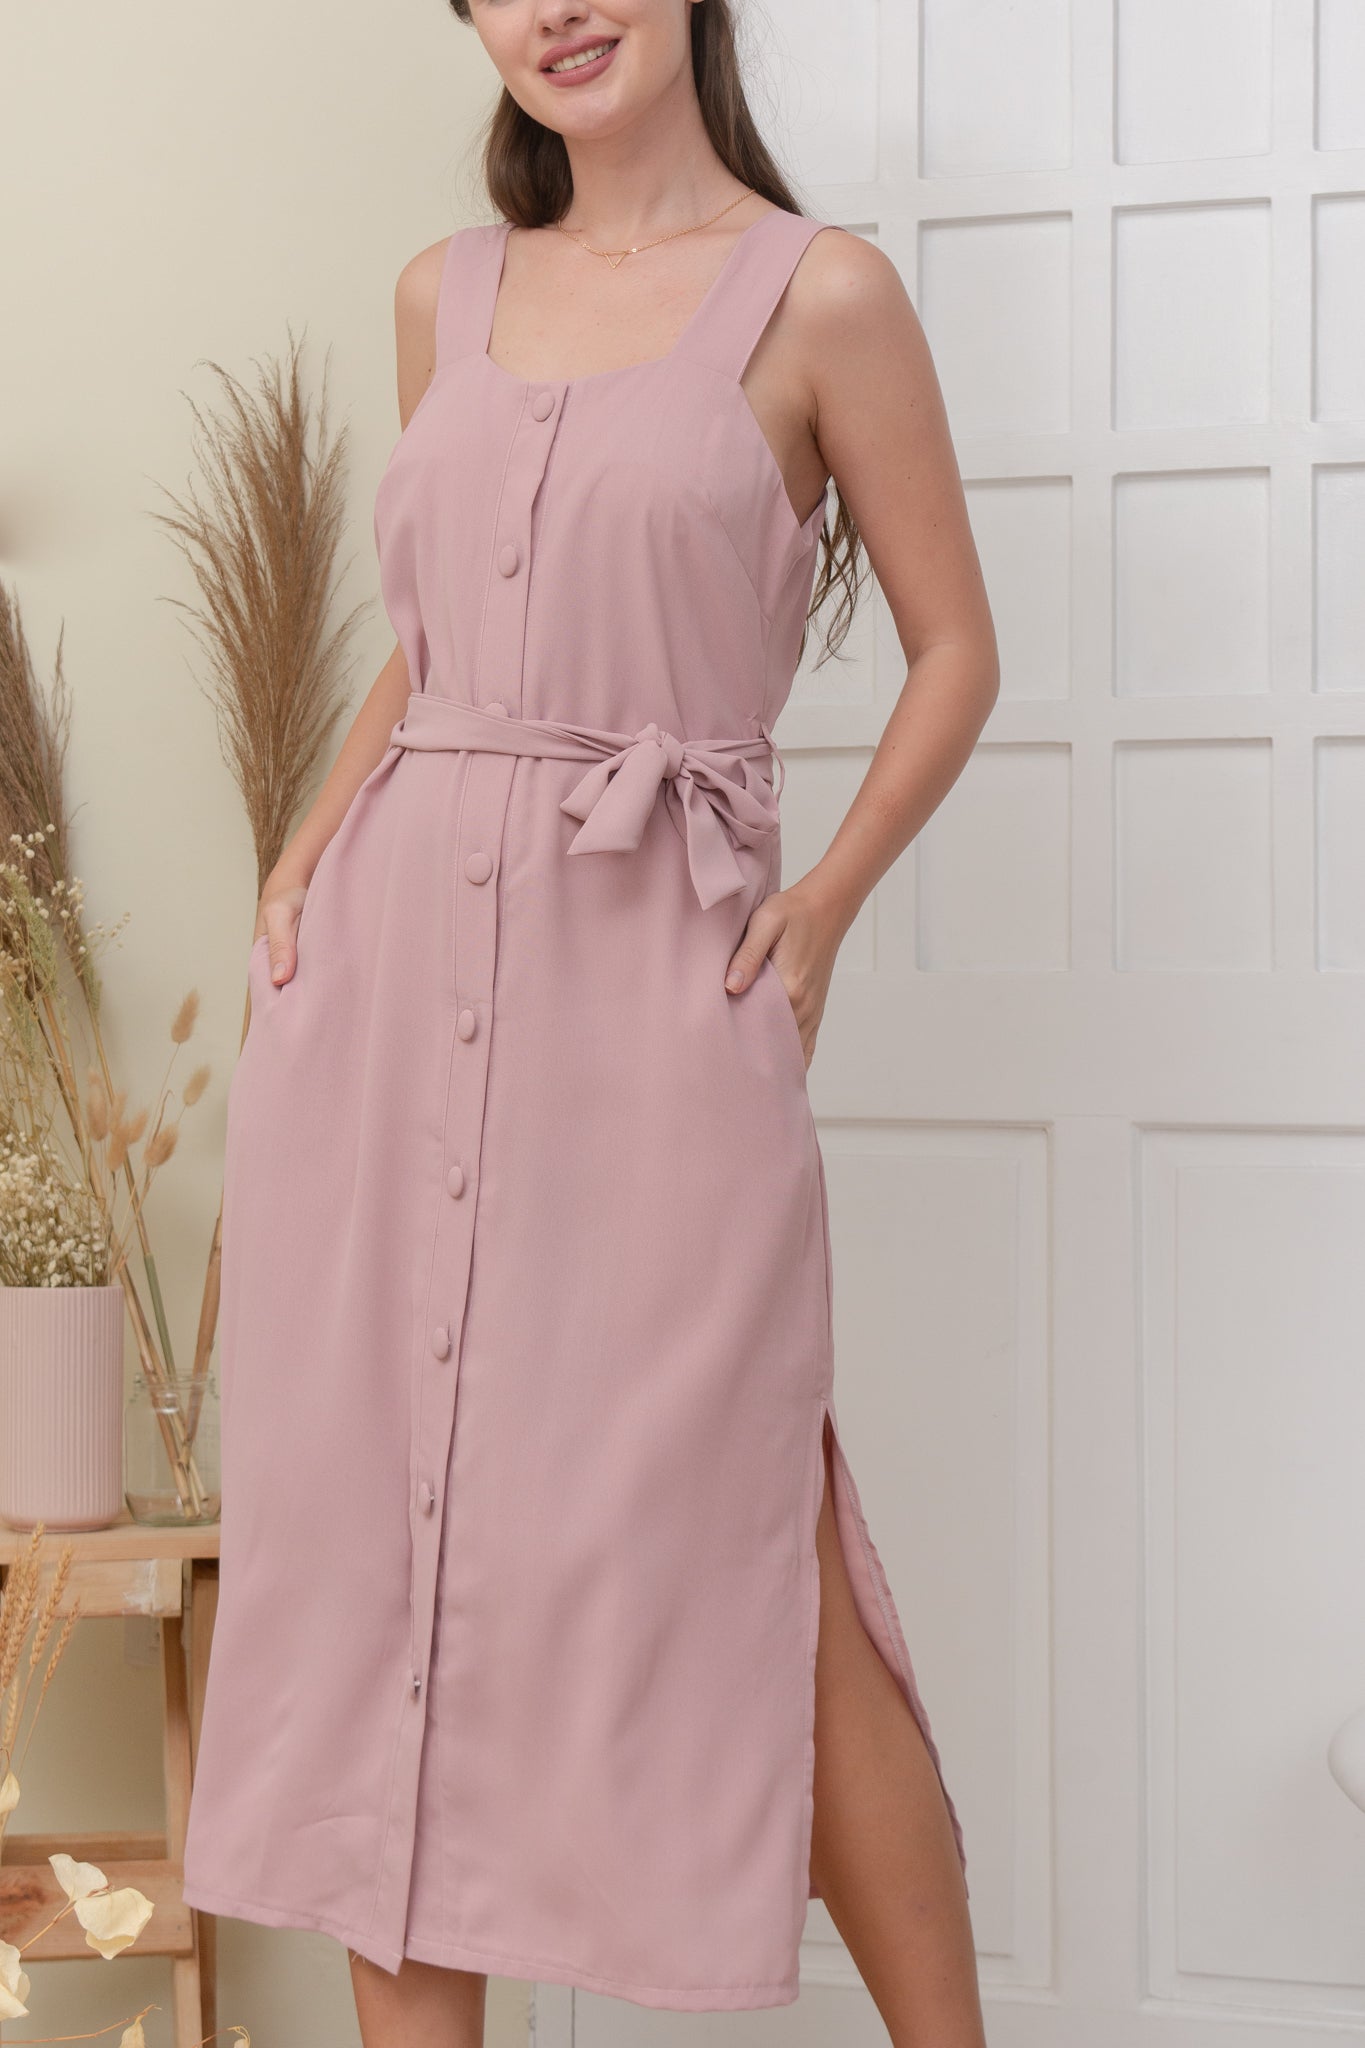 CORA DRESS IN PINK